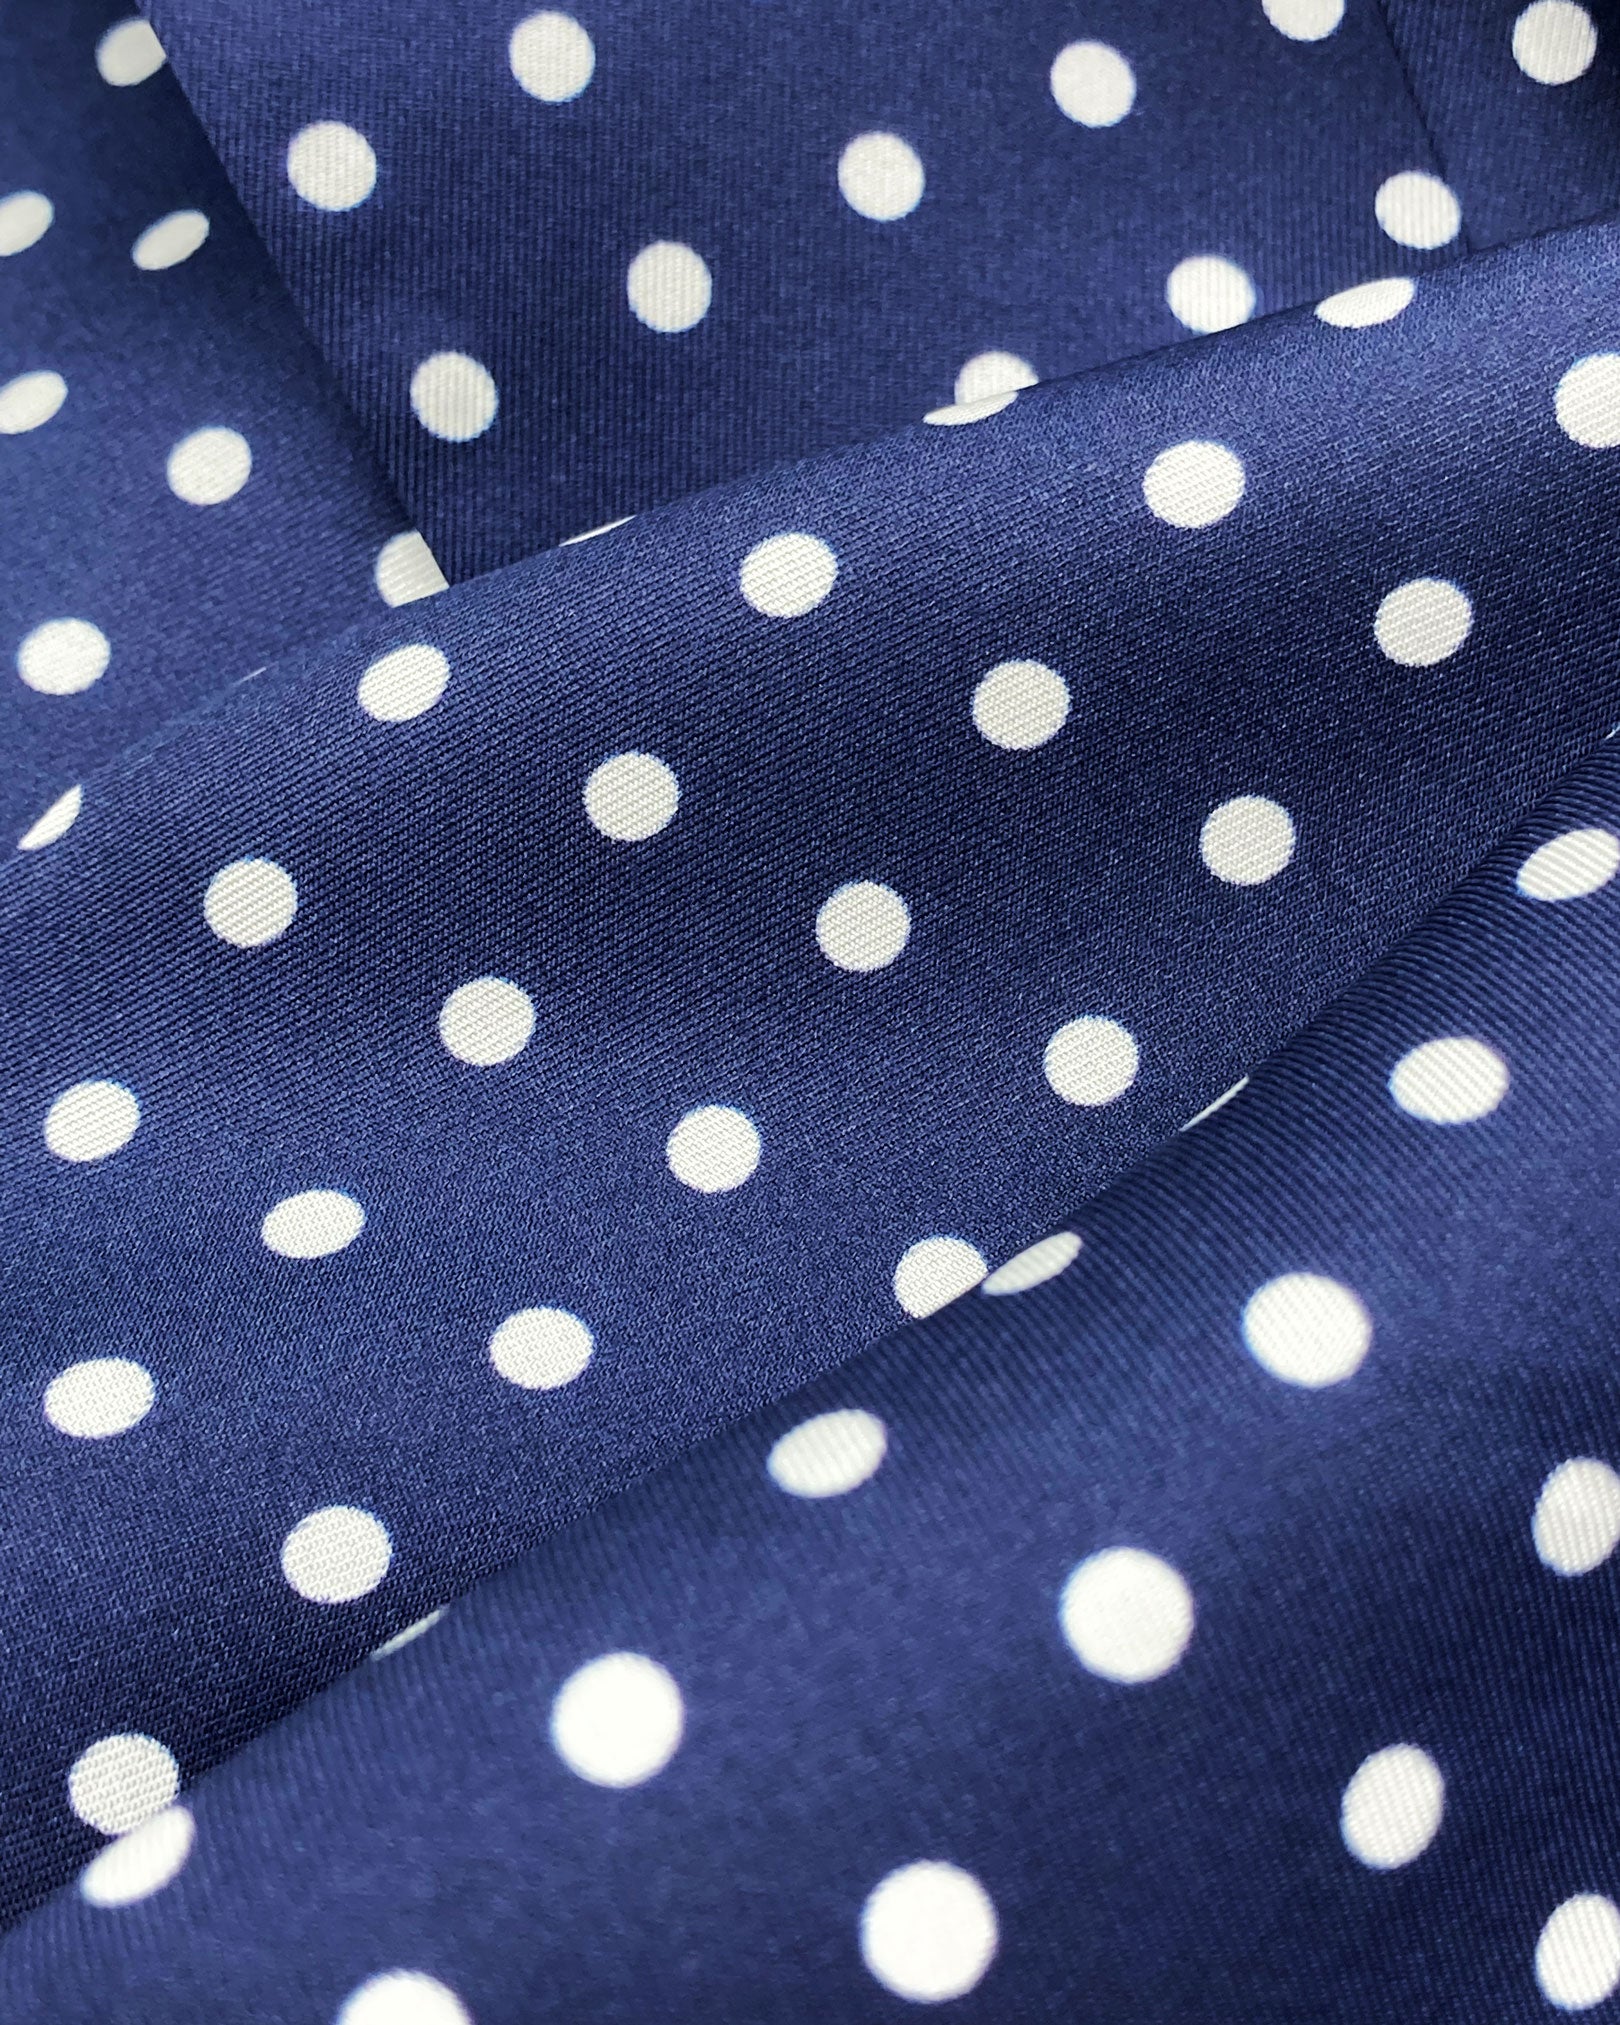 Ruffled close-up view of the 'Westminster' silk scarf, presenting a closer view of the polka dot design in navy-blue with white spots and subtle lustre of the silk material.